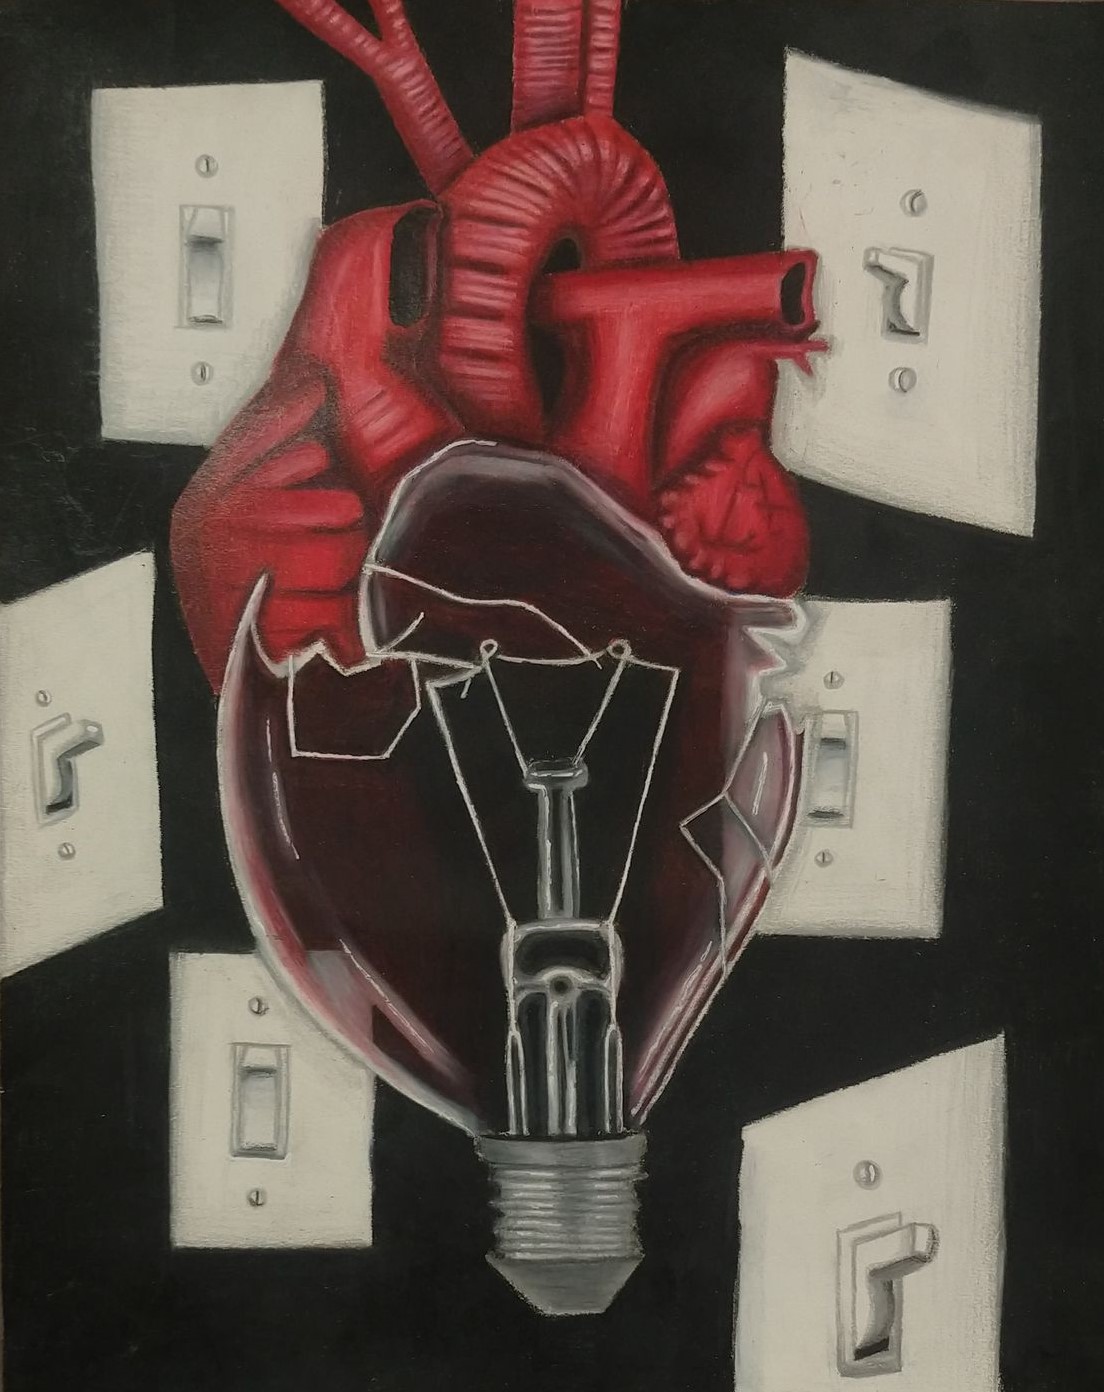 A broken bulb with a human heart on top of it and light switches in the background